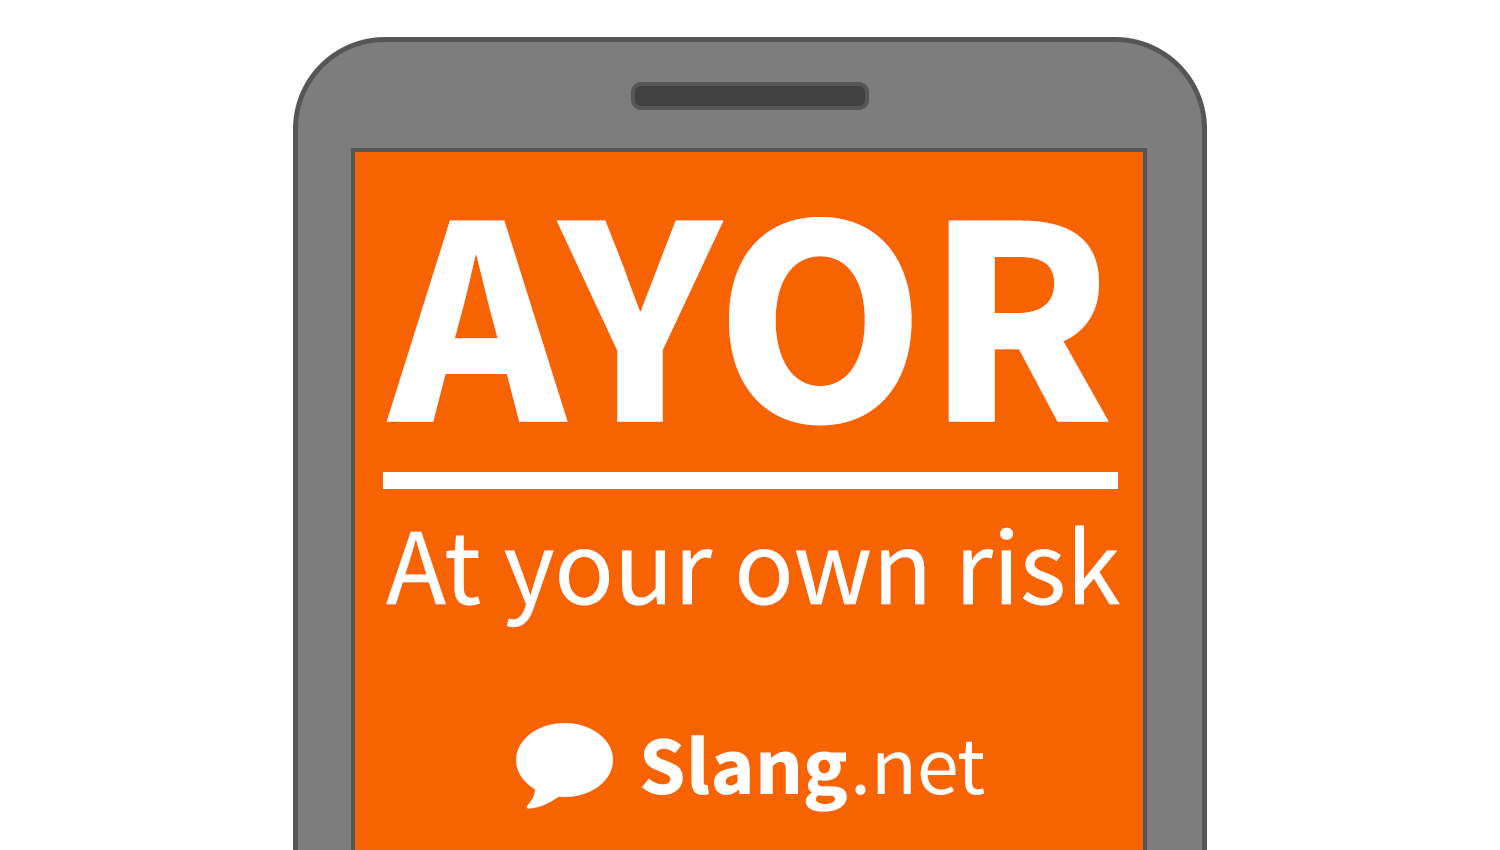 You may see &quot;AYOR&quot; in messages and online to mean &quot;at your own risk&quot;